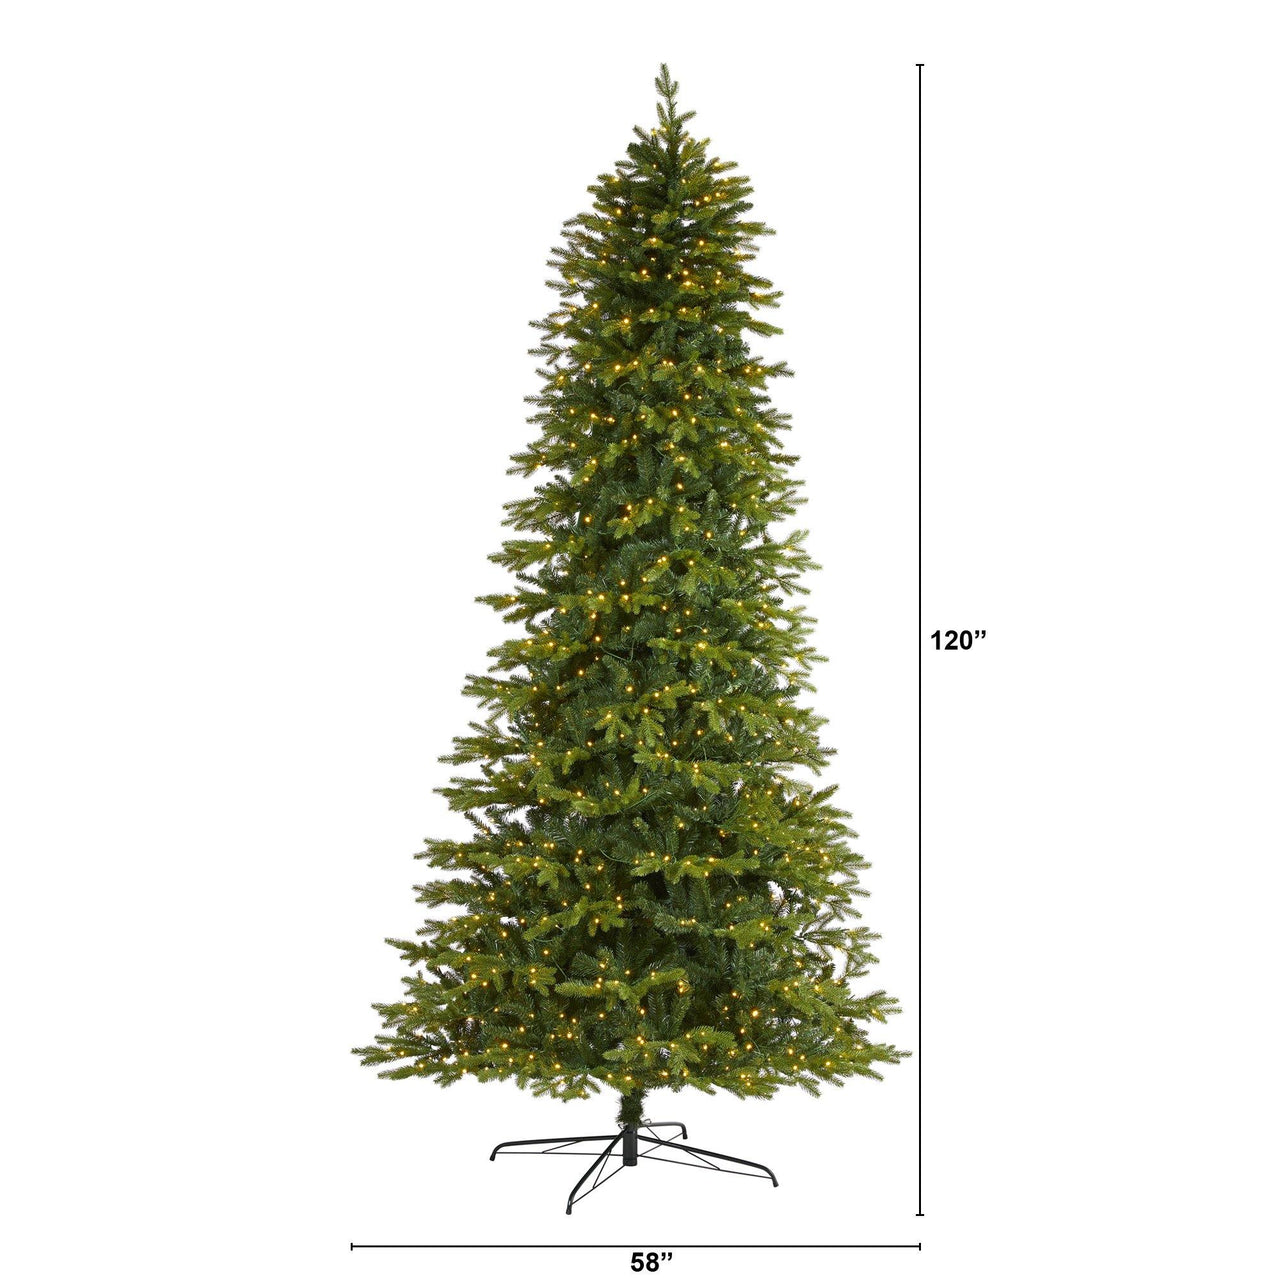 10’ Belgium Fir “Natural Look” Artificial Christmas Tree with 1050 Clear LED Lights - The Fox Decor